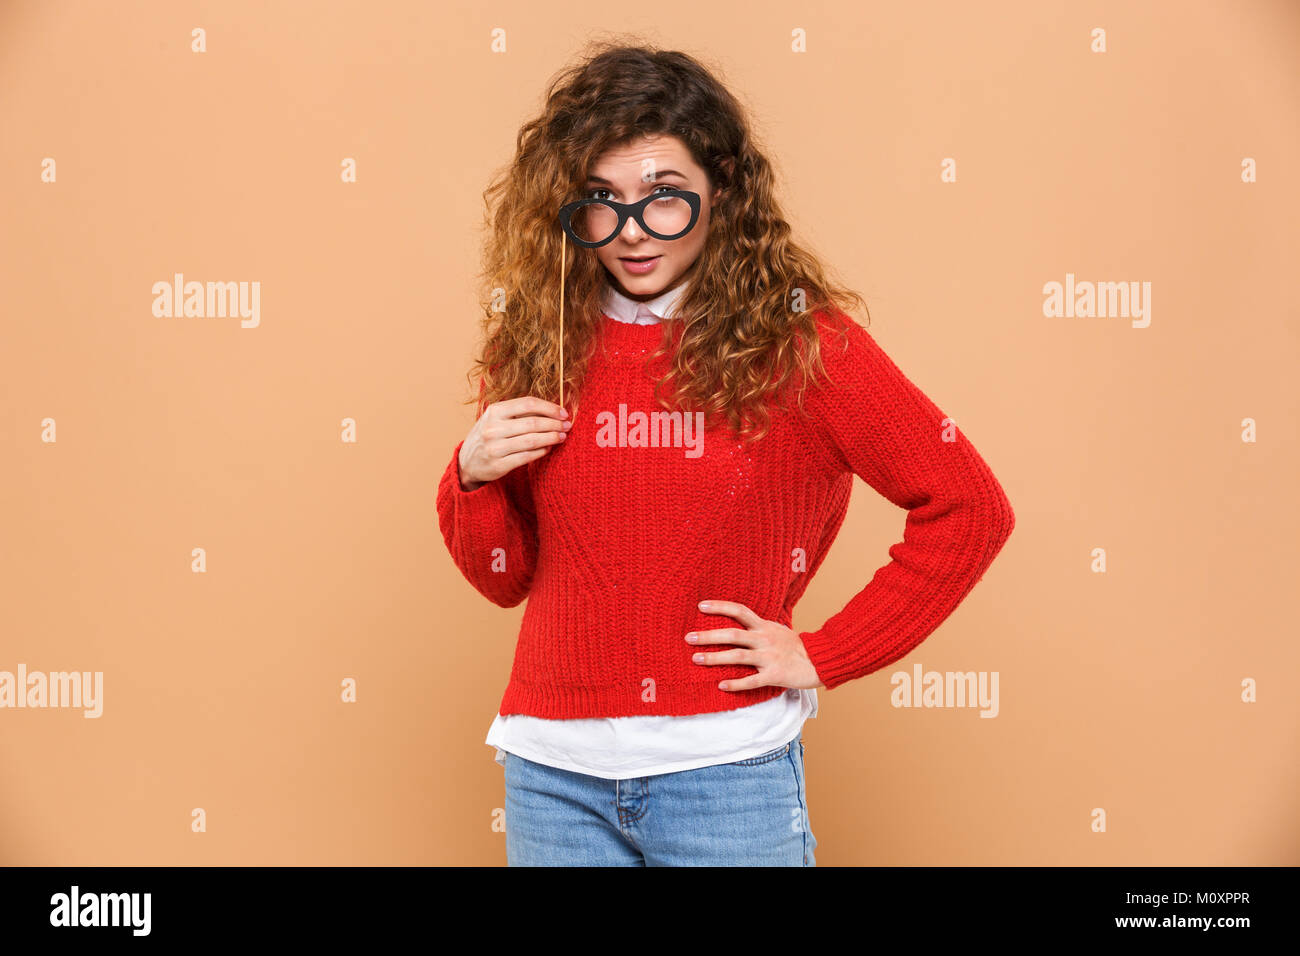 Portrait of a funny young girl holding fake eyeglasses at her face isolated over beige background Stock Photo